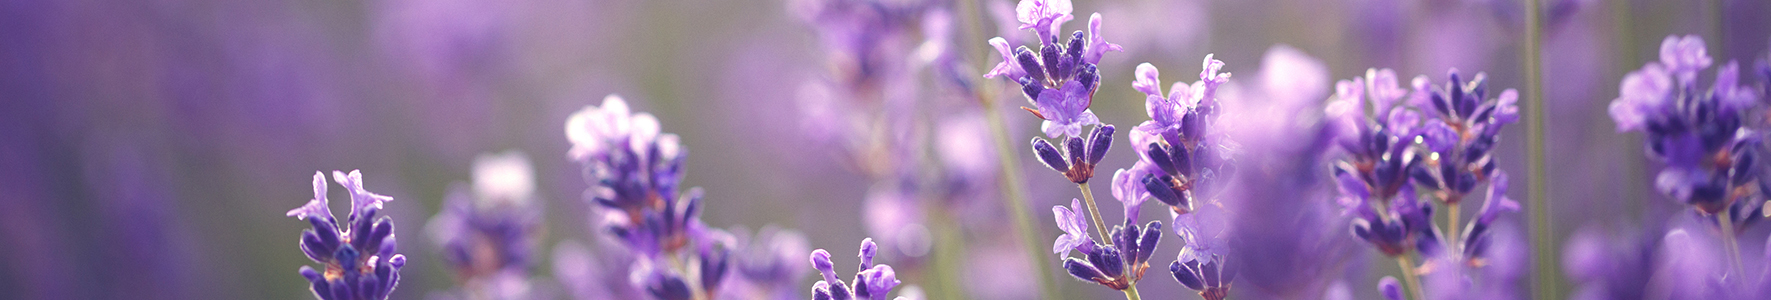 Close up on lavender plants in a field